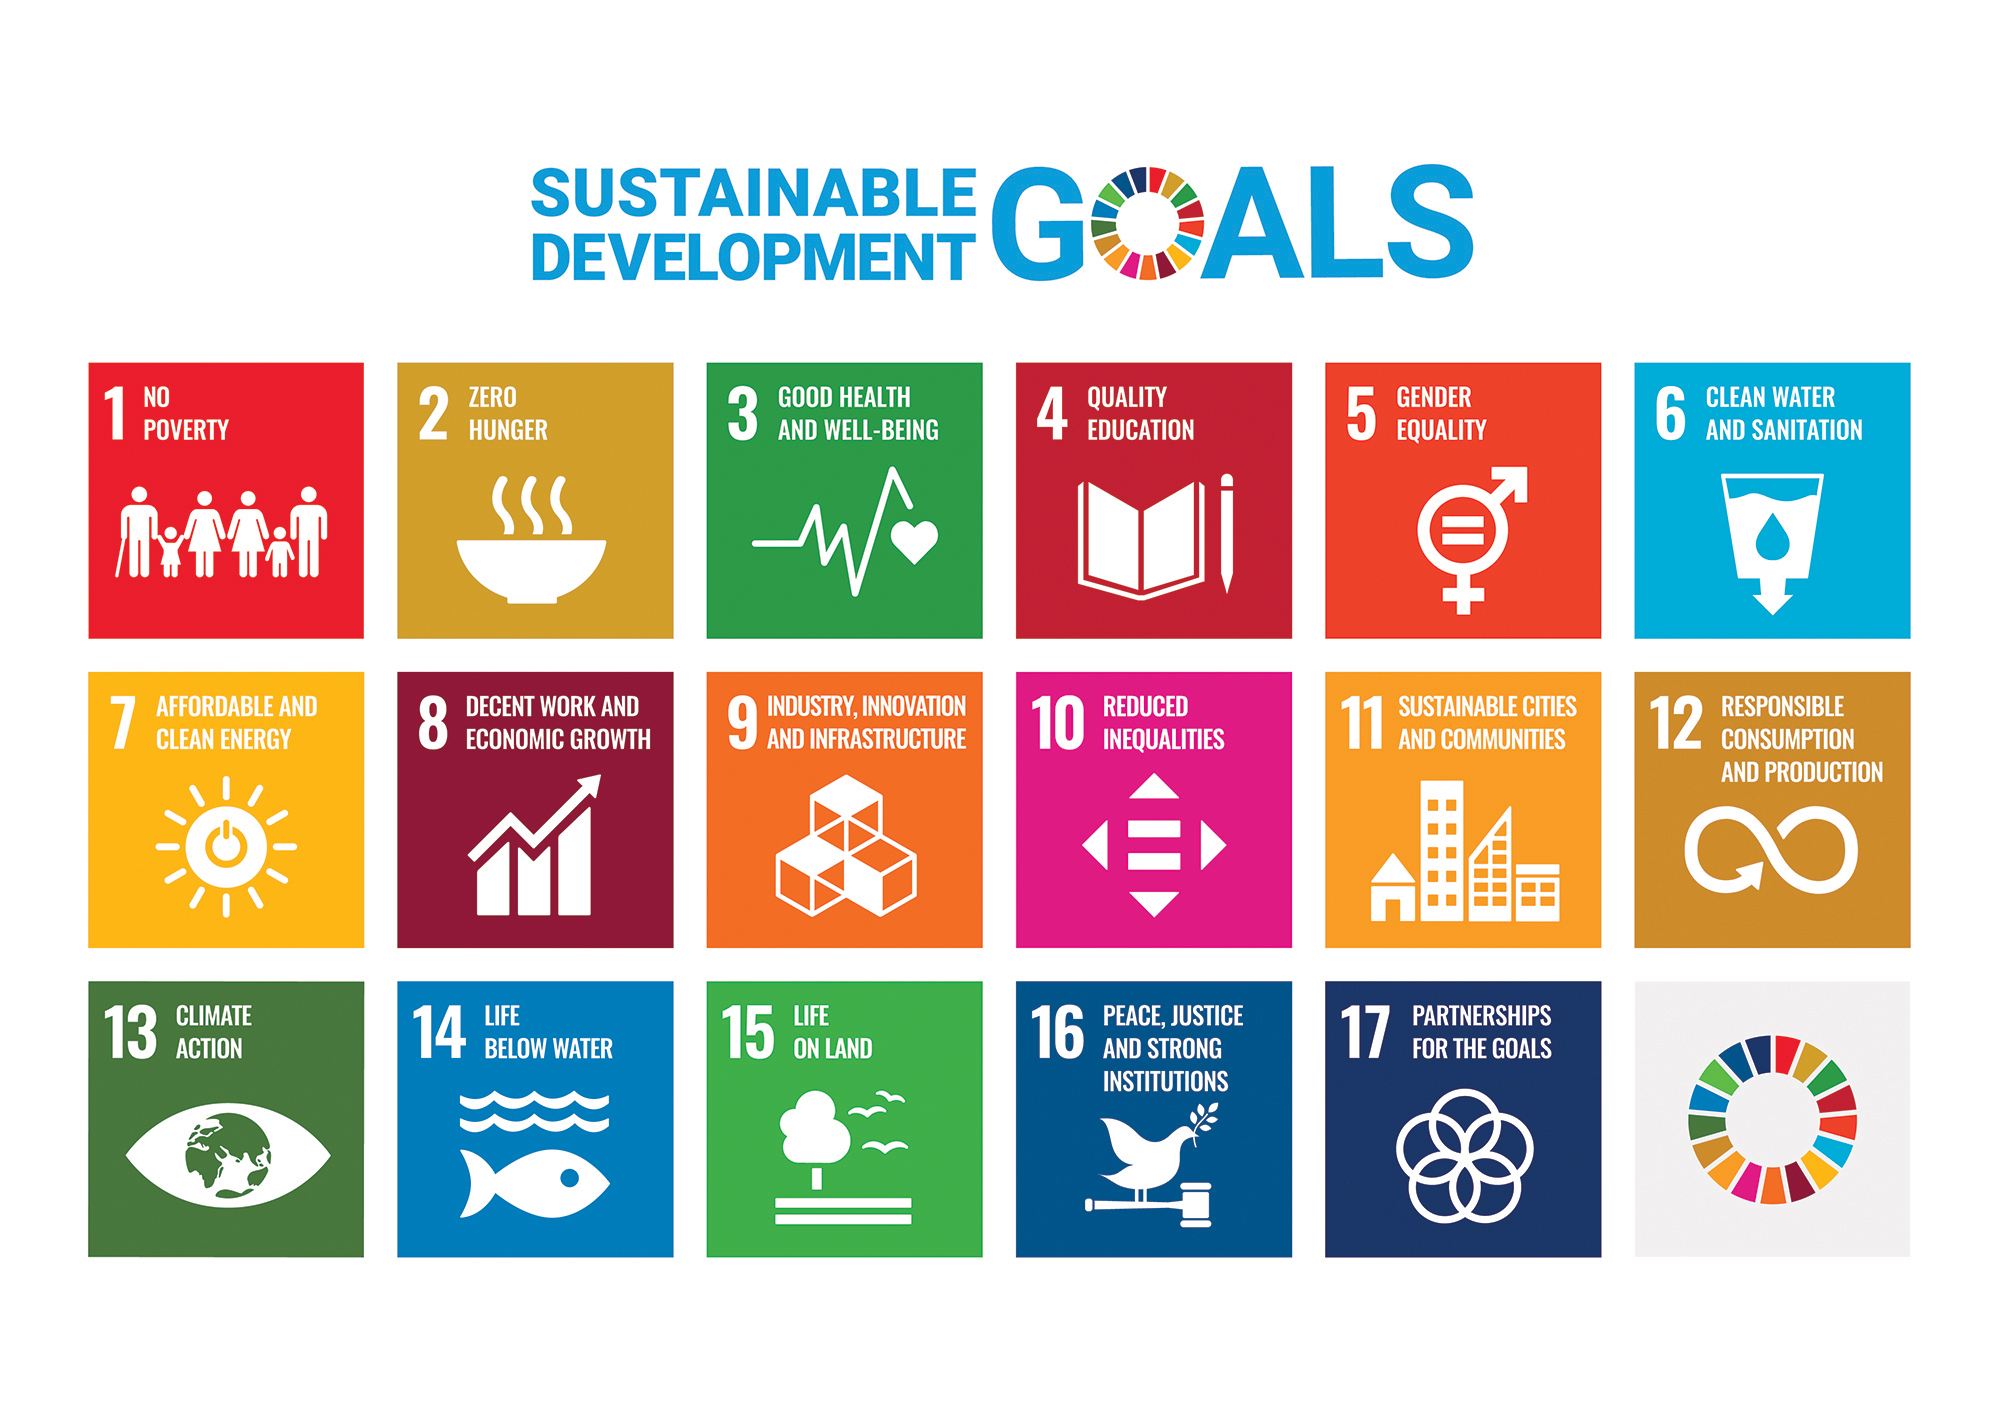 Infographic listing the 17 sustainable development goals published by the UN.: No Poverty Zero Hunger Good Health and Well-being Quality Education Gender Equality Clean Water and Sanitation Affordable and Clean Energy Decent Work and Economic Growth Industry, Innovation, and Infrastructure Reduced Inequality Sustainable Cities and Communities Responsible Consumption and Production Climate Action Life Below Water Life on Land Peace, Justice, and Strong Institutions Partnerships for the Goals